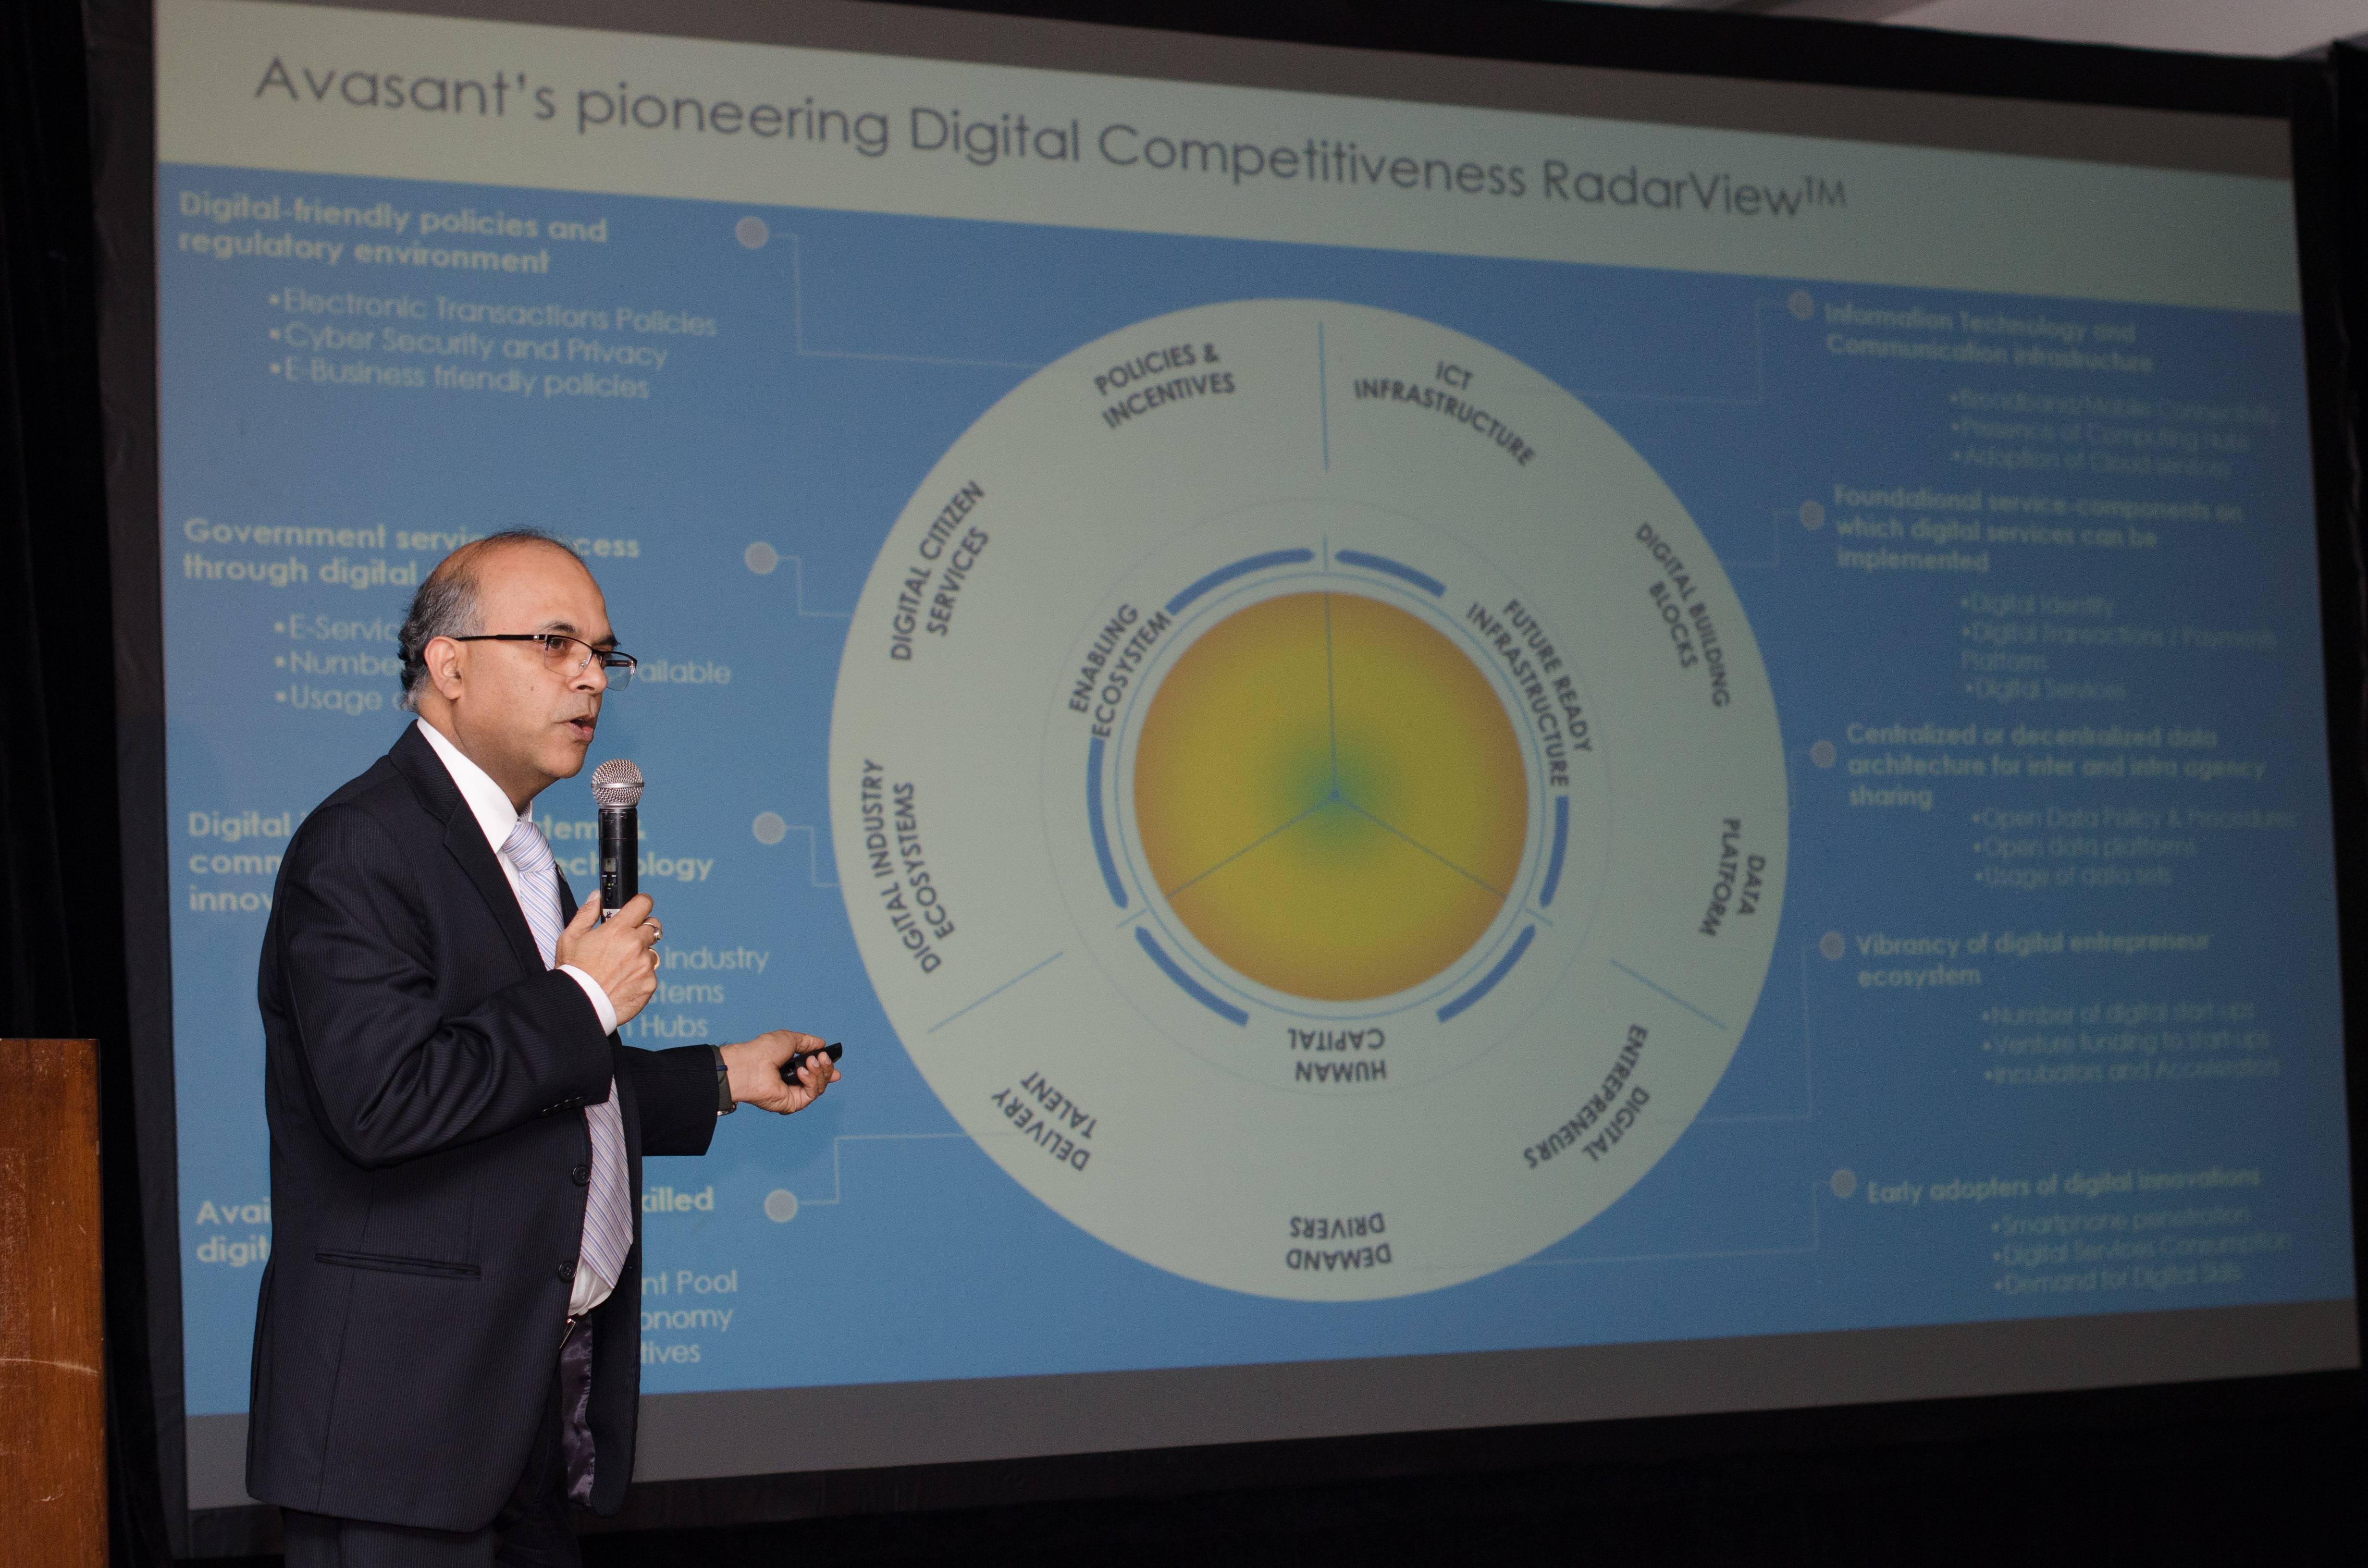 Anupam Govil, Partner, Avasant, presents the three critical dimensions of the Digital Competitiveness RadarView: Future Ready Infrastructure; Enabling Ecosystem; and Human Capital